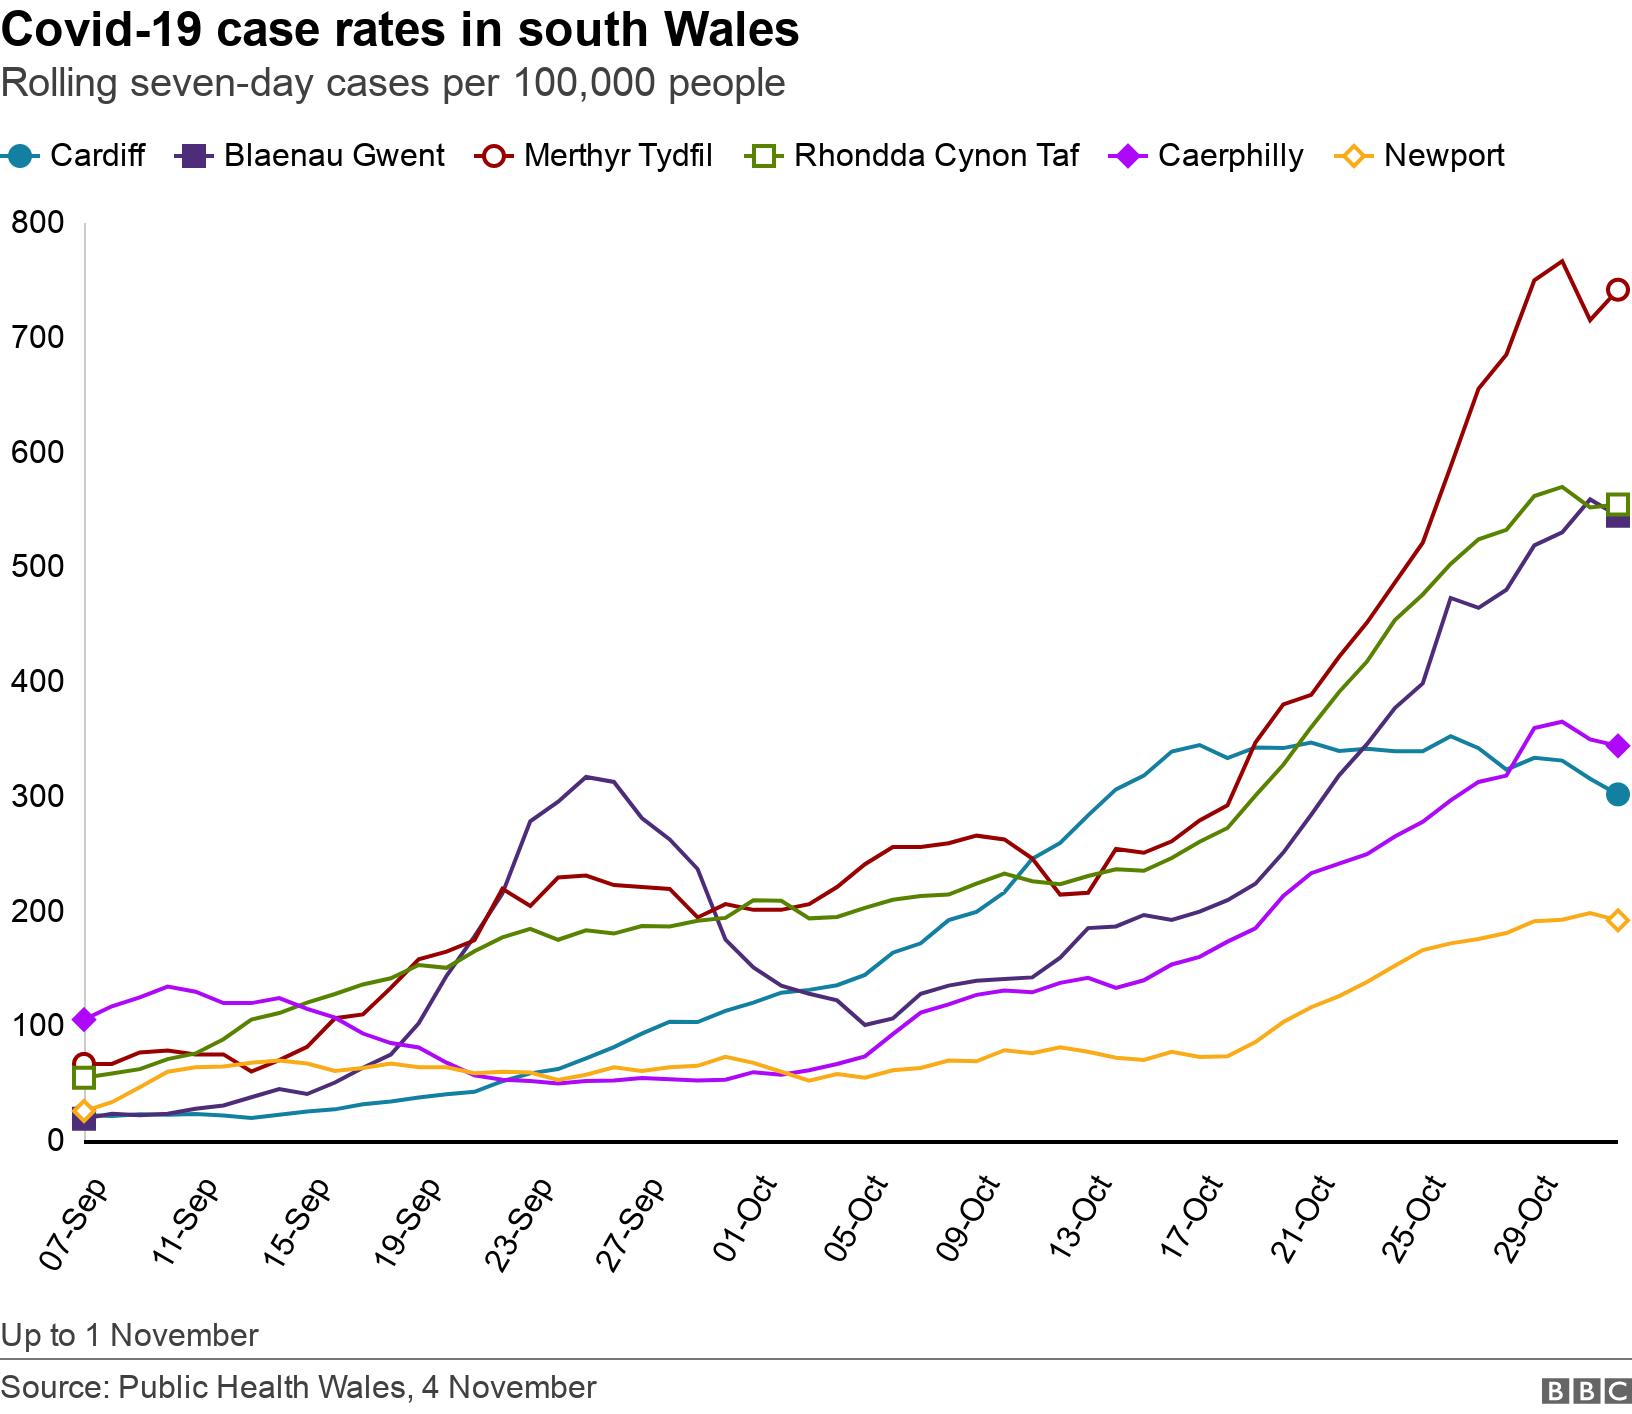 Covid-19 case rates in south Wales. Rolling seven-day cases per 100,000 people. Up to 1 November.